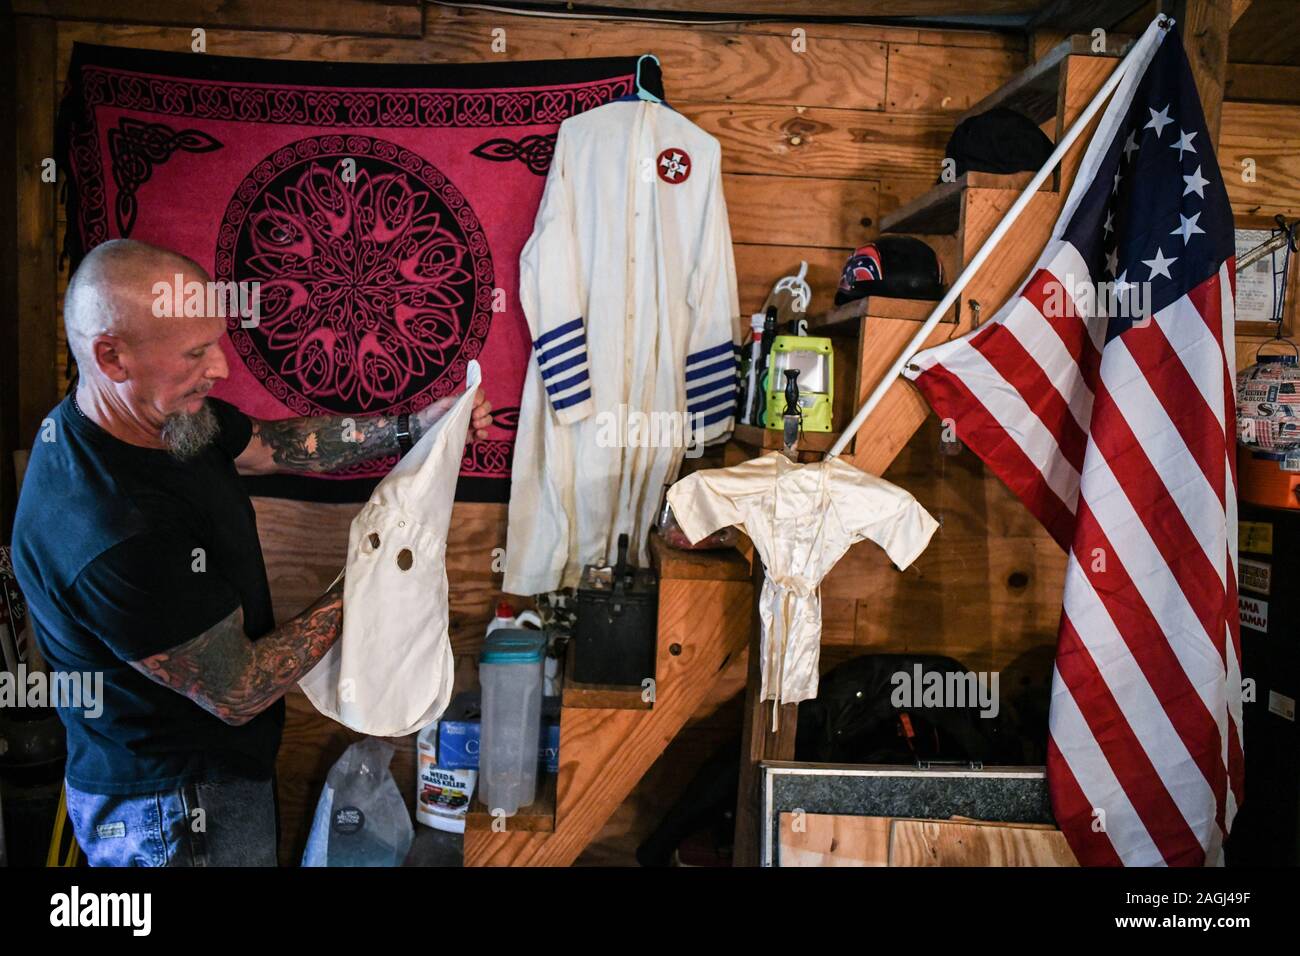 Dahlonega, Georgia, USA. 18th Sep, 2019. CHESTER DOLES shows his old Imperial Wizard, Ku Klux Klan hood and gown. He calls the Klan 'one of the most American organizations in the country and one of the oldest. And I guess even Klansman can get older and wiser. I mean we have Robert Byrd the Senator (from West Virginia) who was a Democrat and served as a full member of the Klan.' Credit: Miguel Juarez Lugo/ZUMA Wire/Alamy Live News Stock Photo